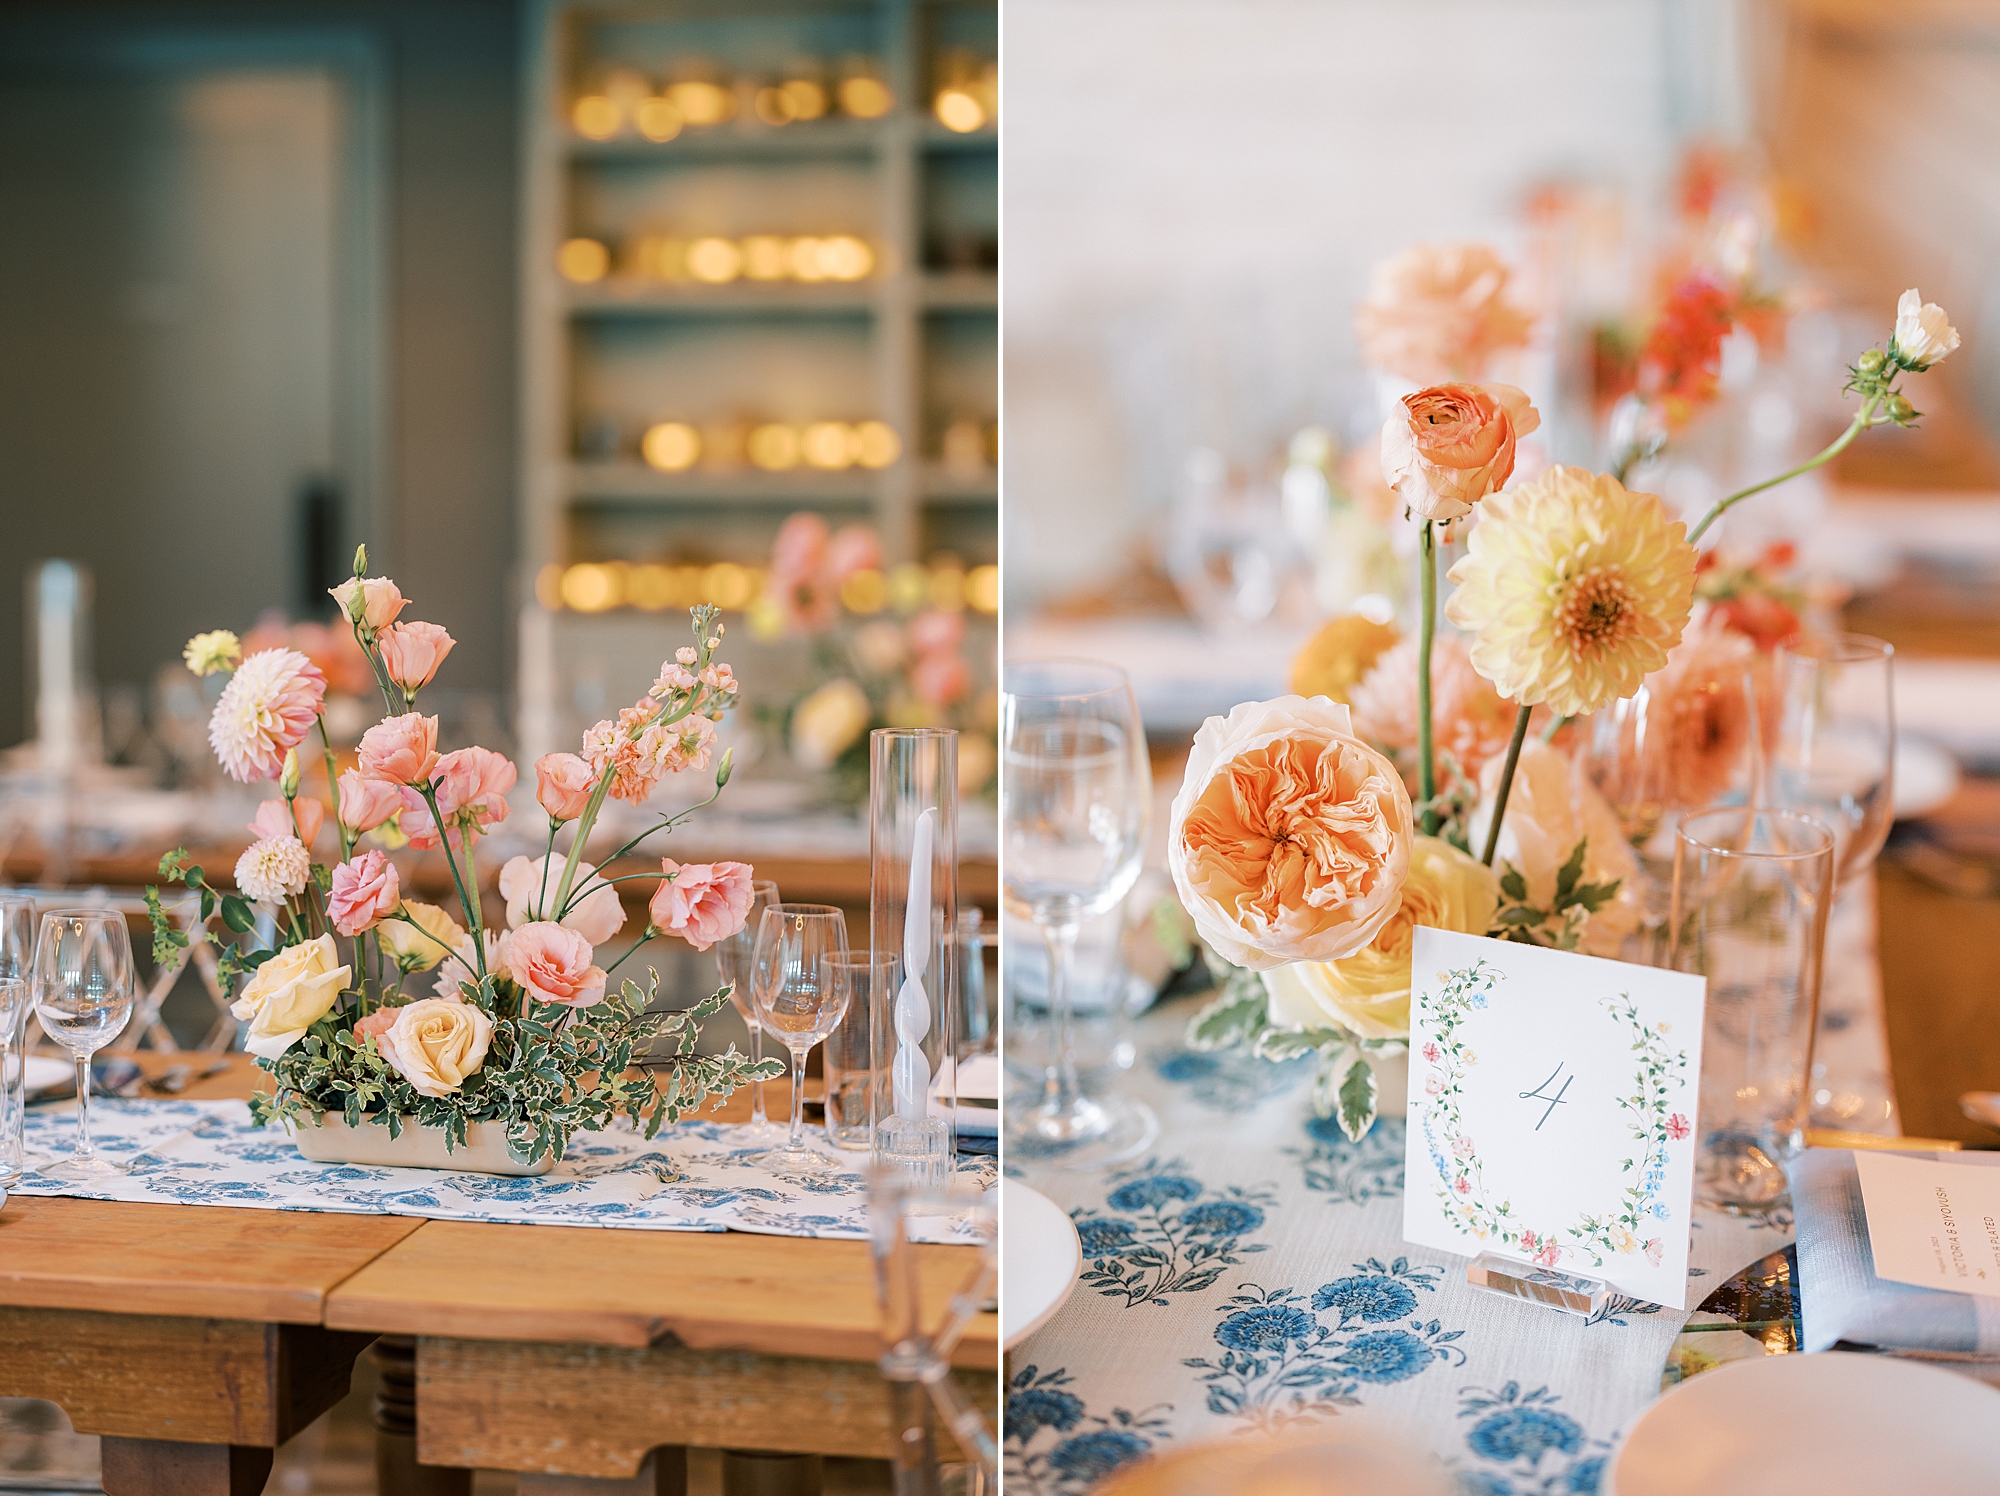 wedding reception with rustic wooden tables, blue and white table runner and bright flower centerpieces at Terrain Gardens